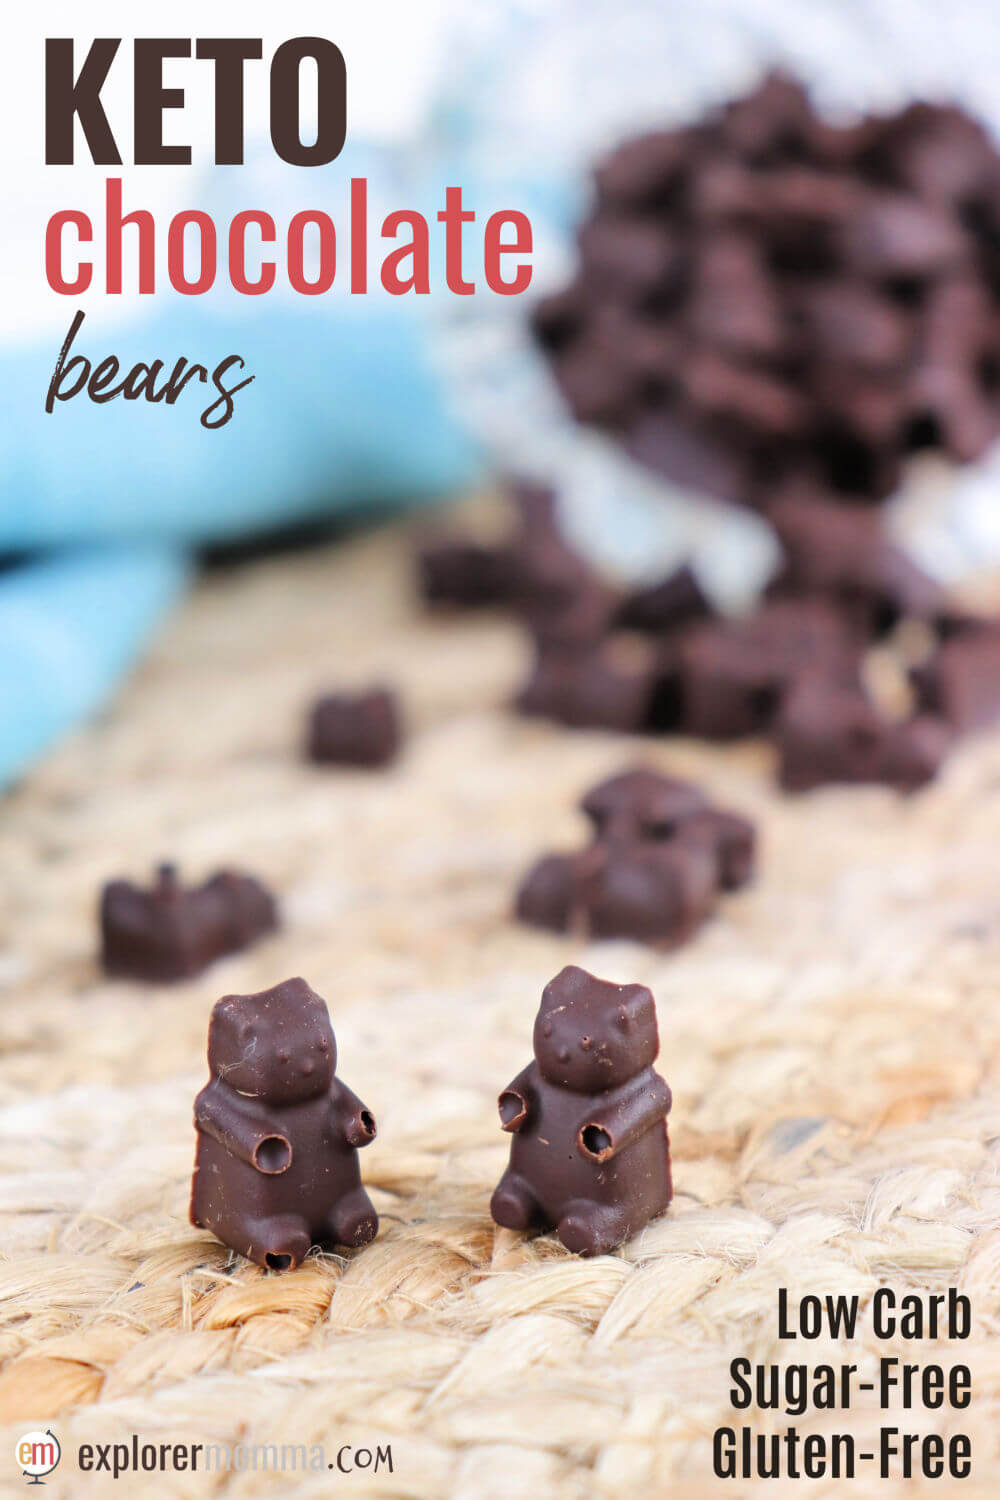 Sugar-free easy 3-ingredient keto chocolate is heaven in a bite when a chocolate craving hits on a low carb diet. Gluten-free and delicious, these can be made in any mold or as bars. #ketochocolate #sugarfreechocolate #lowcarbchocolate #ketodessert